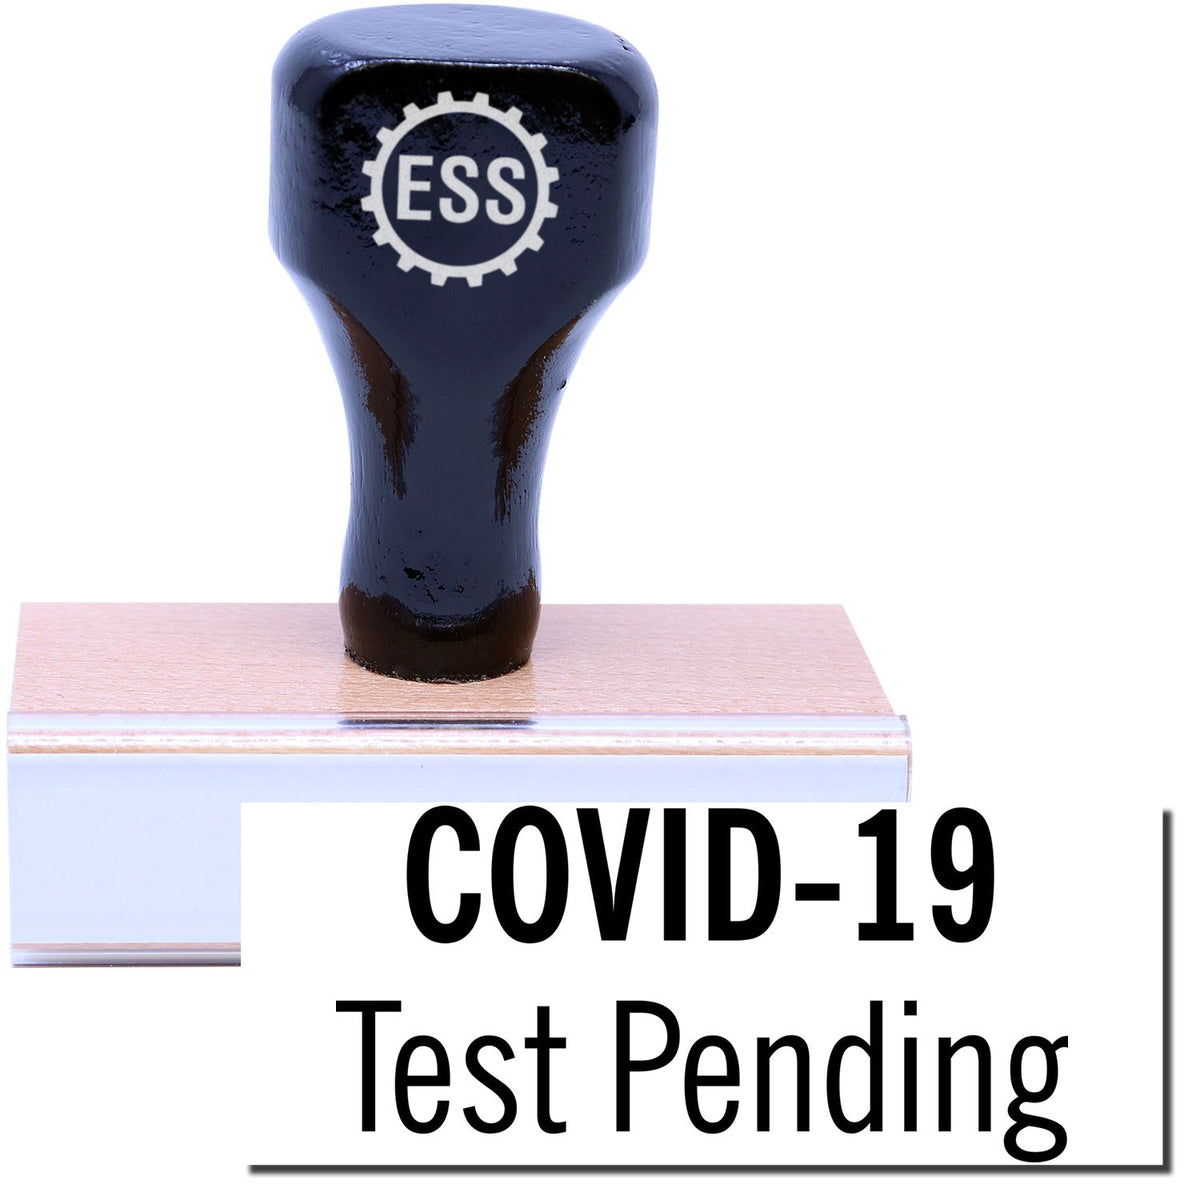 A stock office rubber stamp with a stamped image showing how the text &quot;COVID-19 Test Pending&quot; in a large font is displayed after stamping.